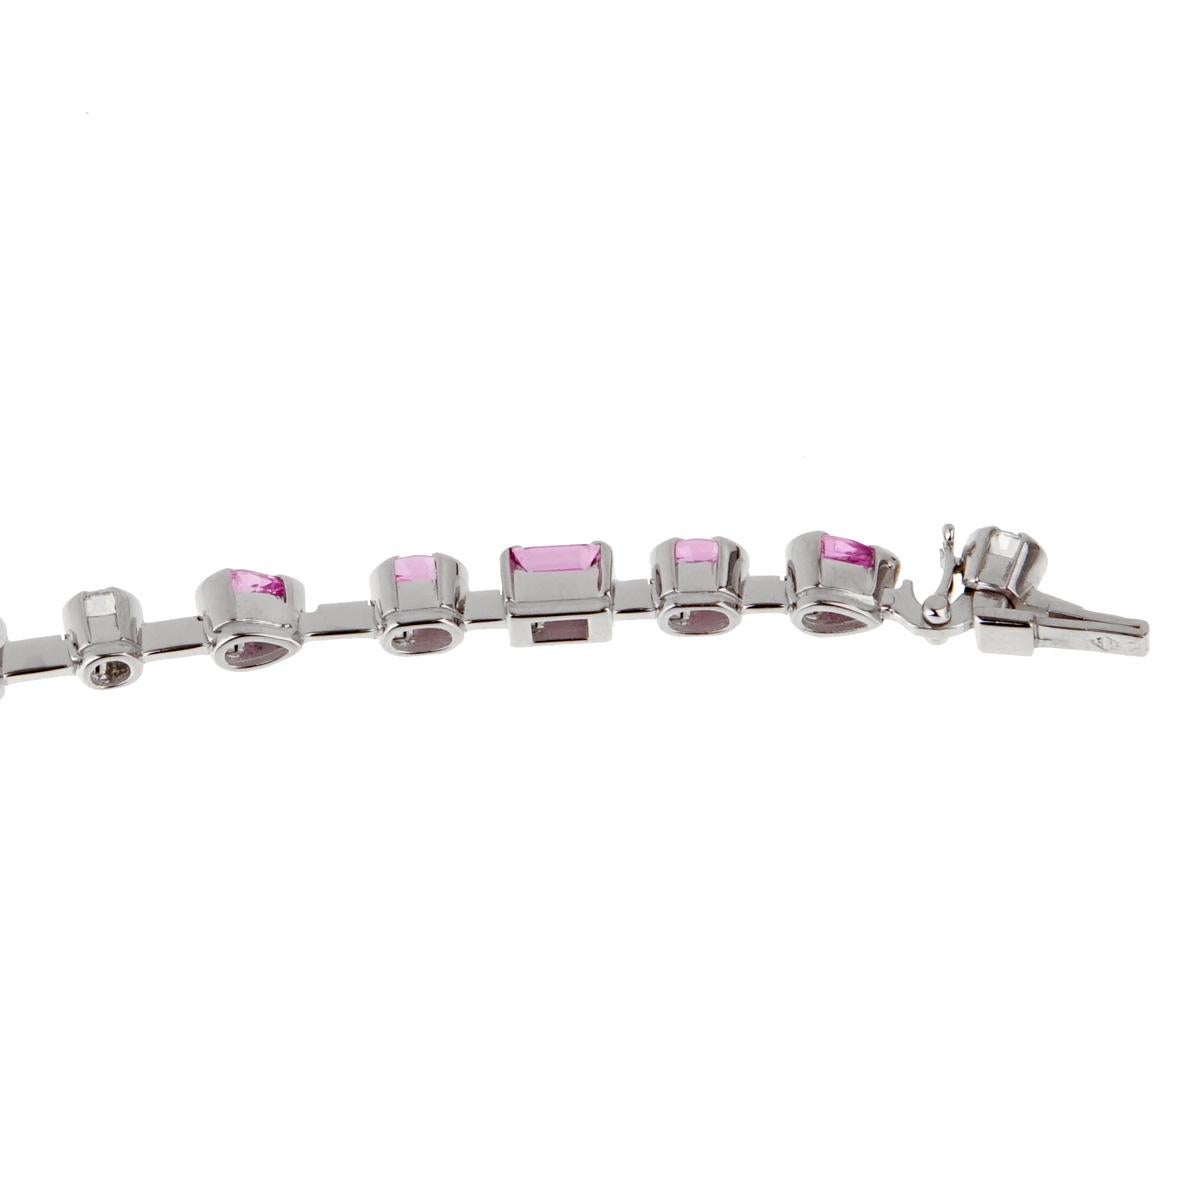 A rare Cartier necklace featuring Pink Sapphires and Round brilliant cut diamonds set in 18k white gold. The necklace measures 15